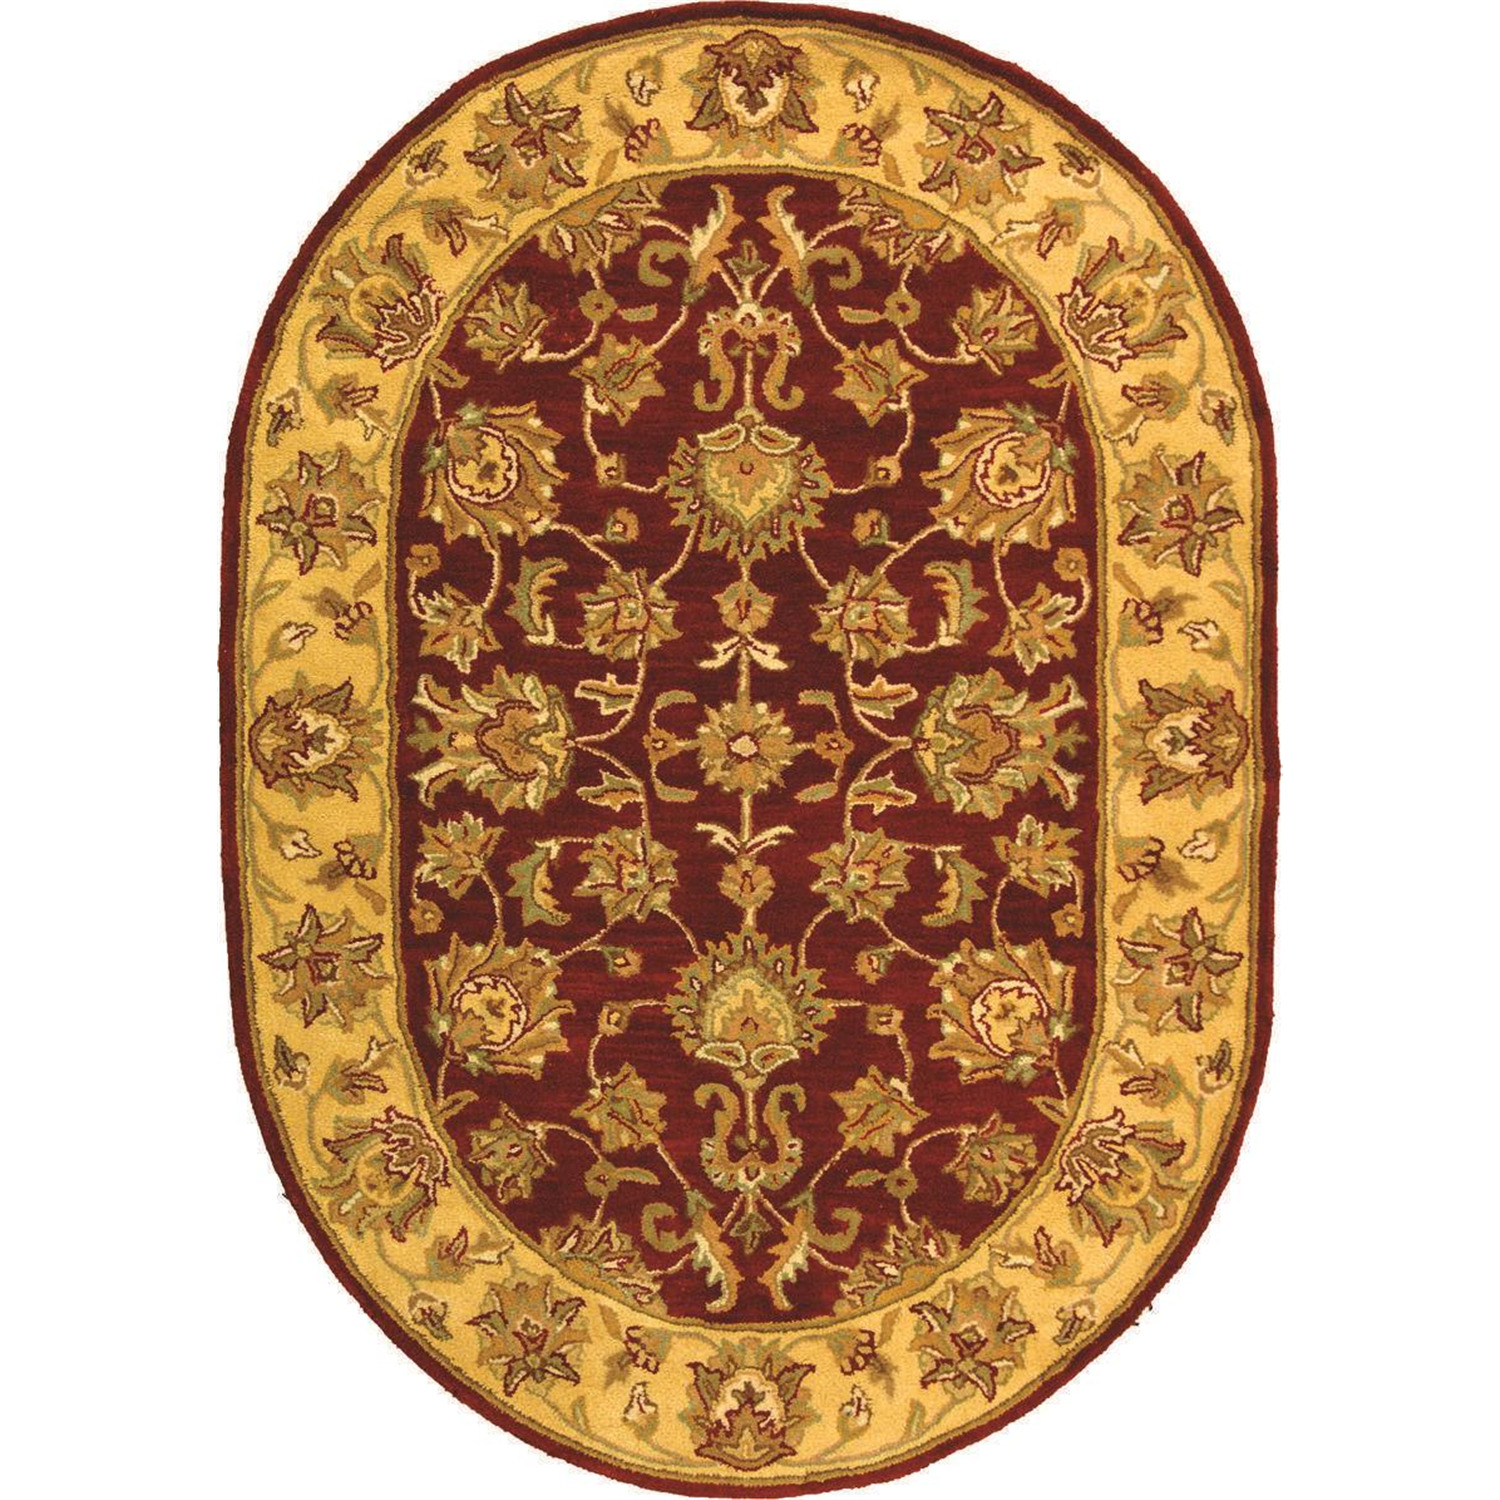 SAFAVIEH Heritage Regis Traditional Wool Area Rug, Red/Gold, 4'6" x 6'6" Oval - image 1 of 9